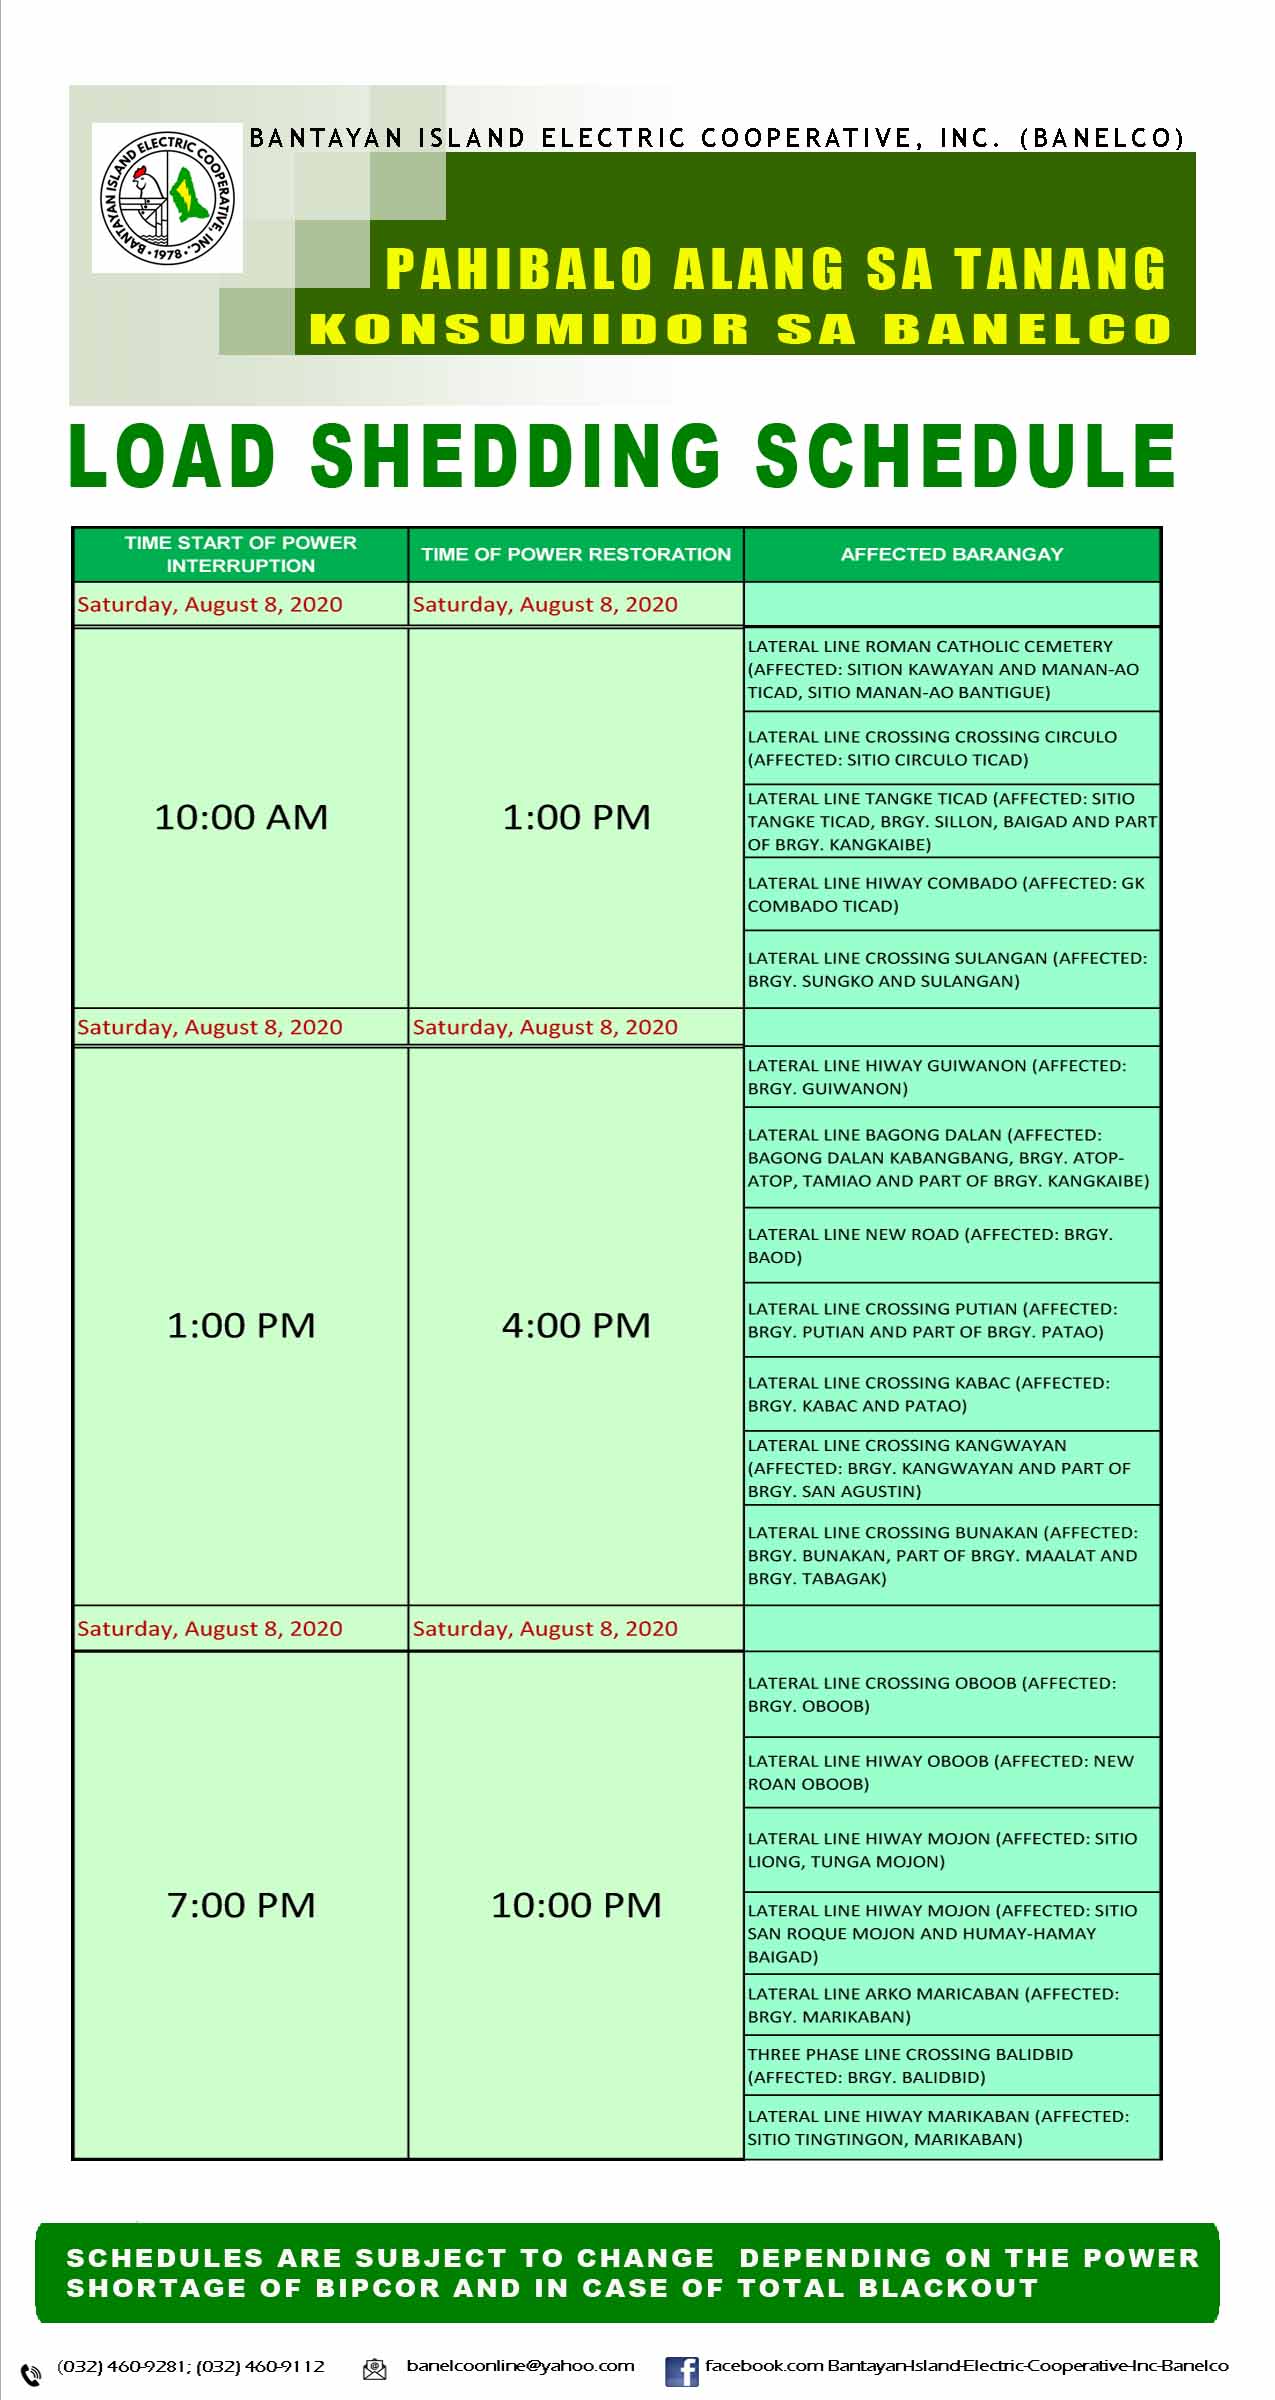 banelco-load-shedding-schedule-8-8-2020